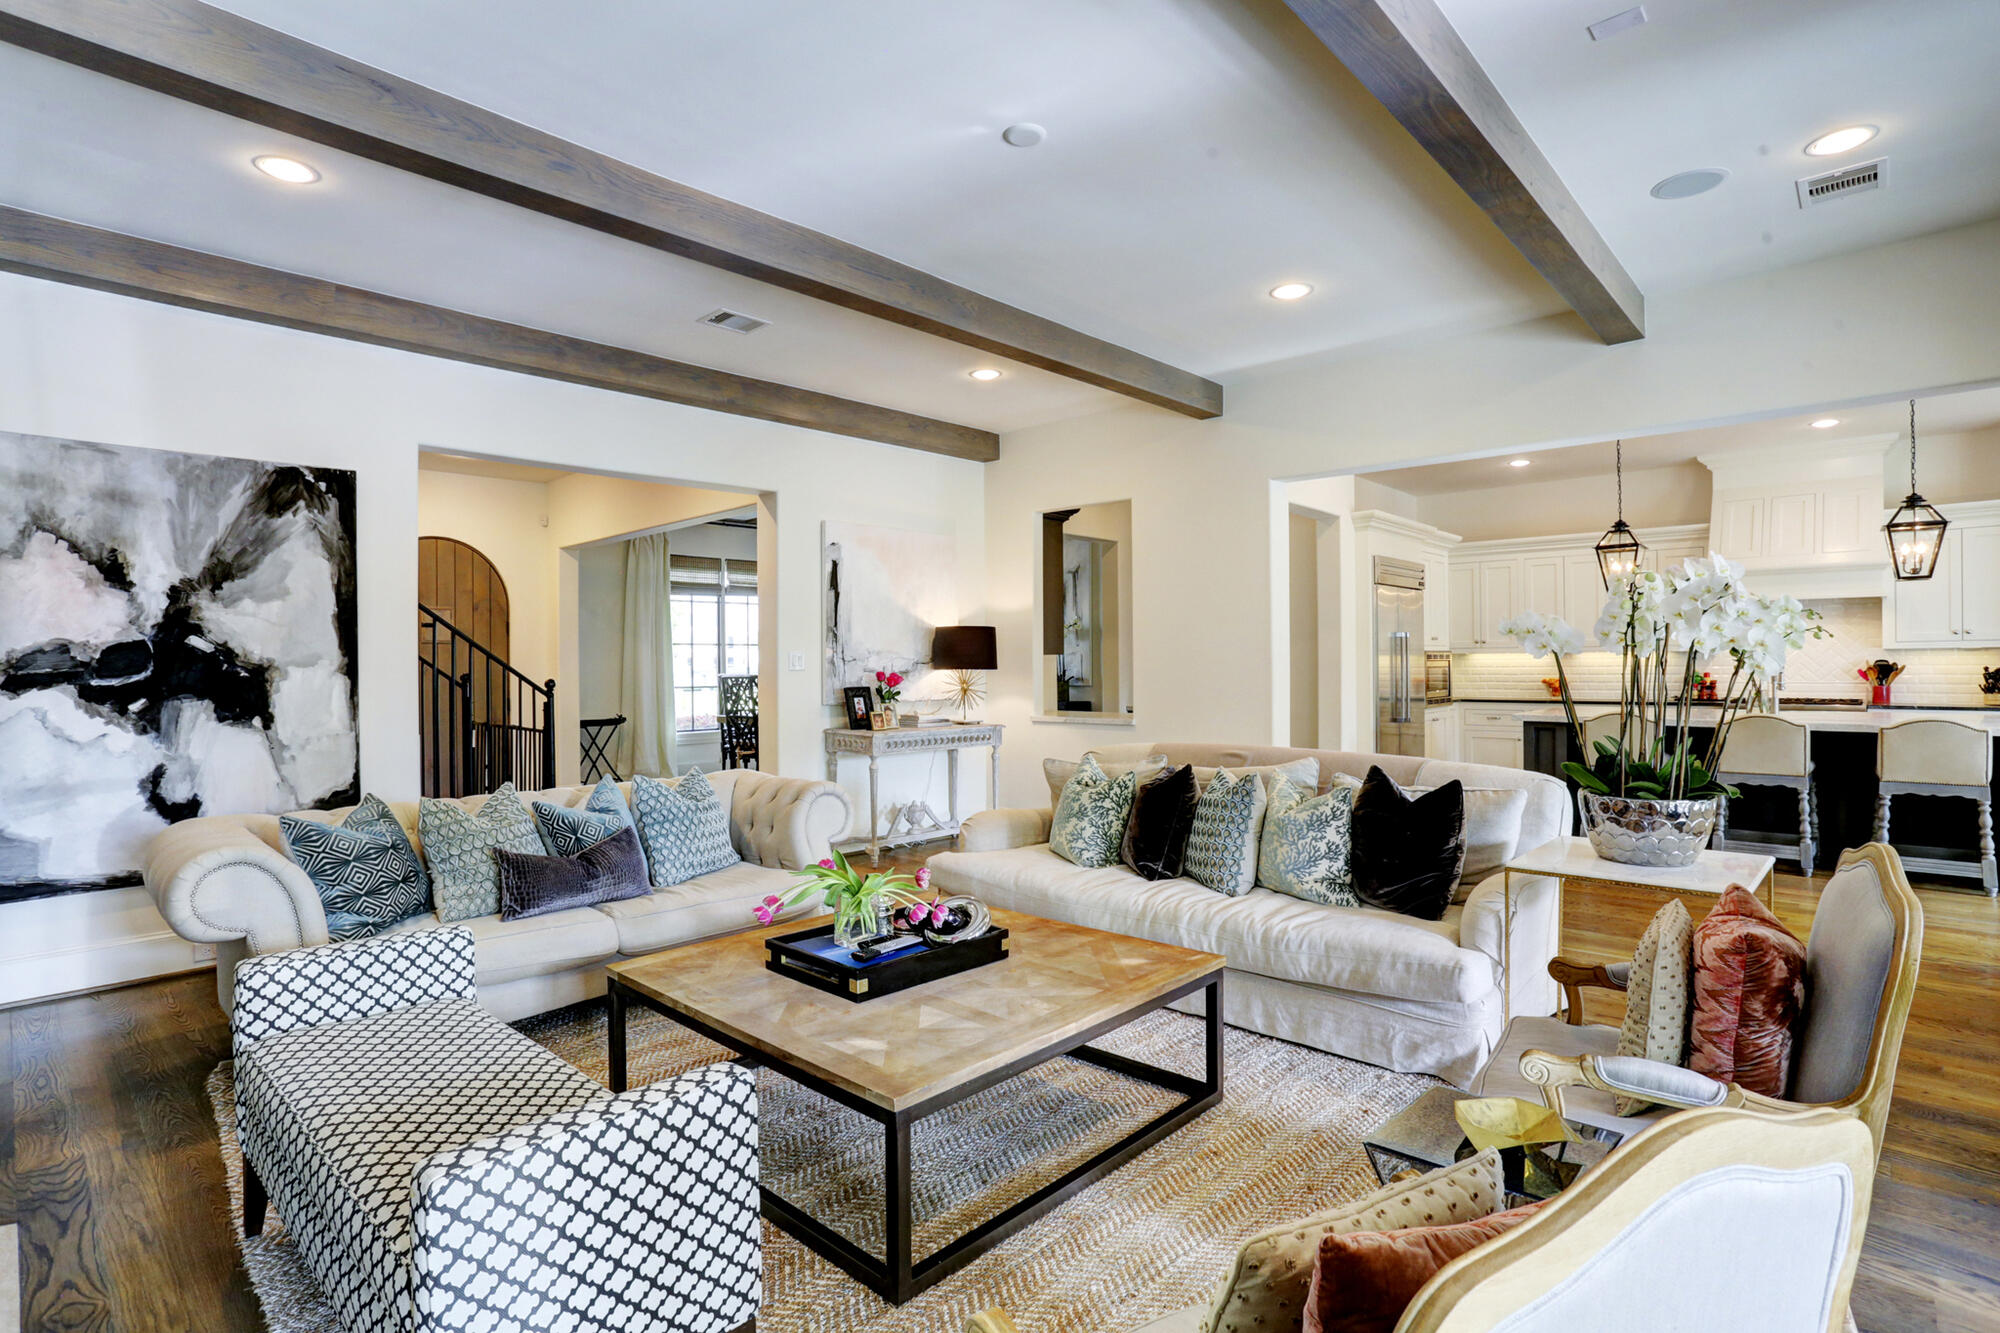 Transitional luxury home living room